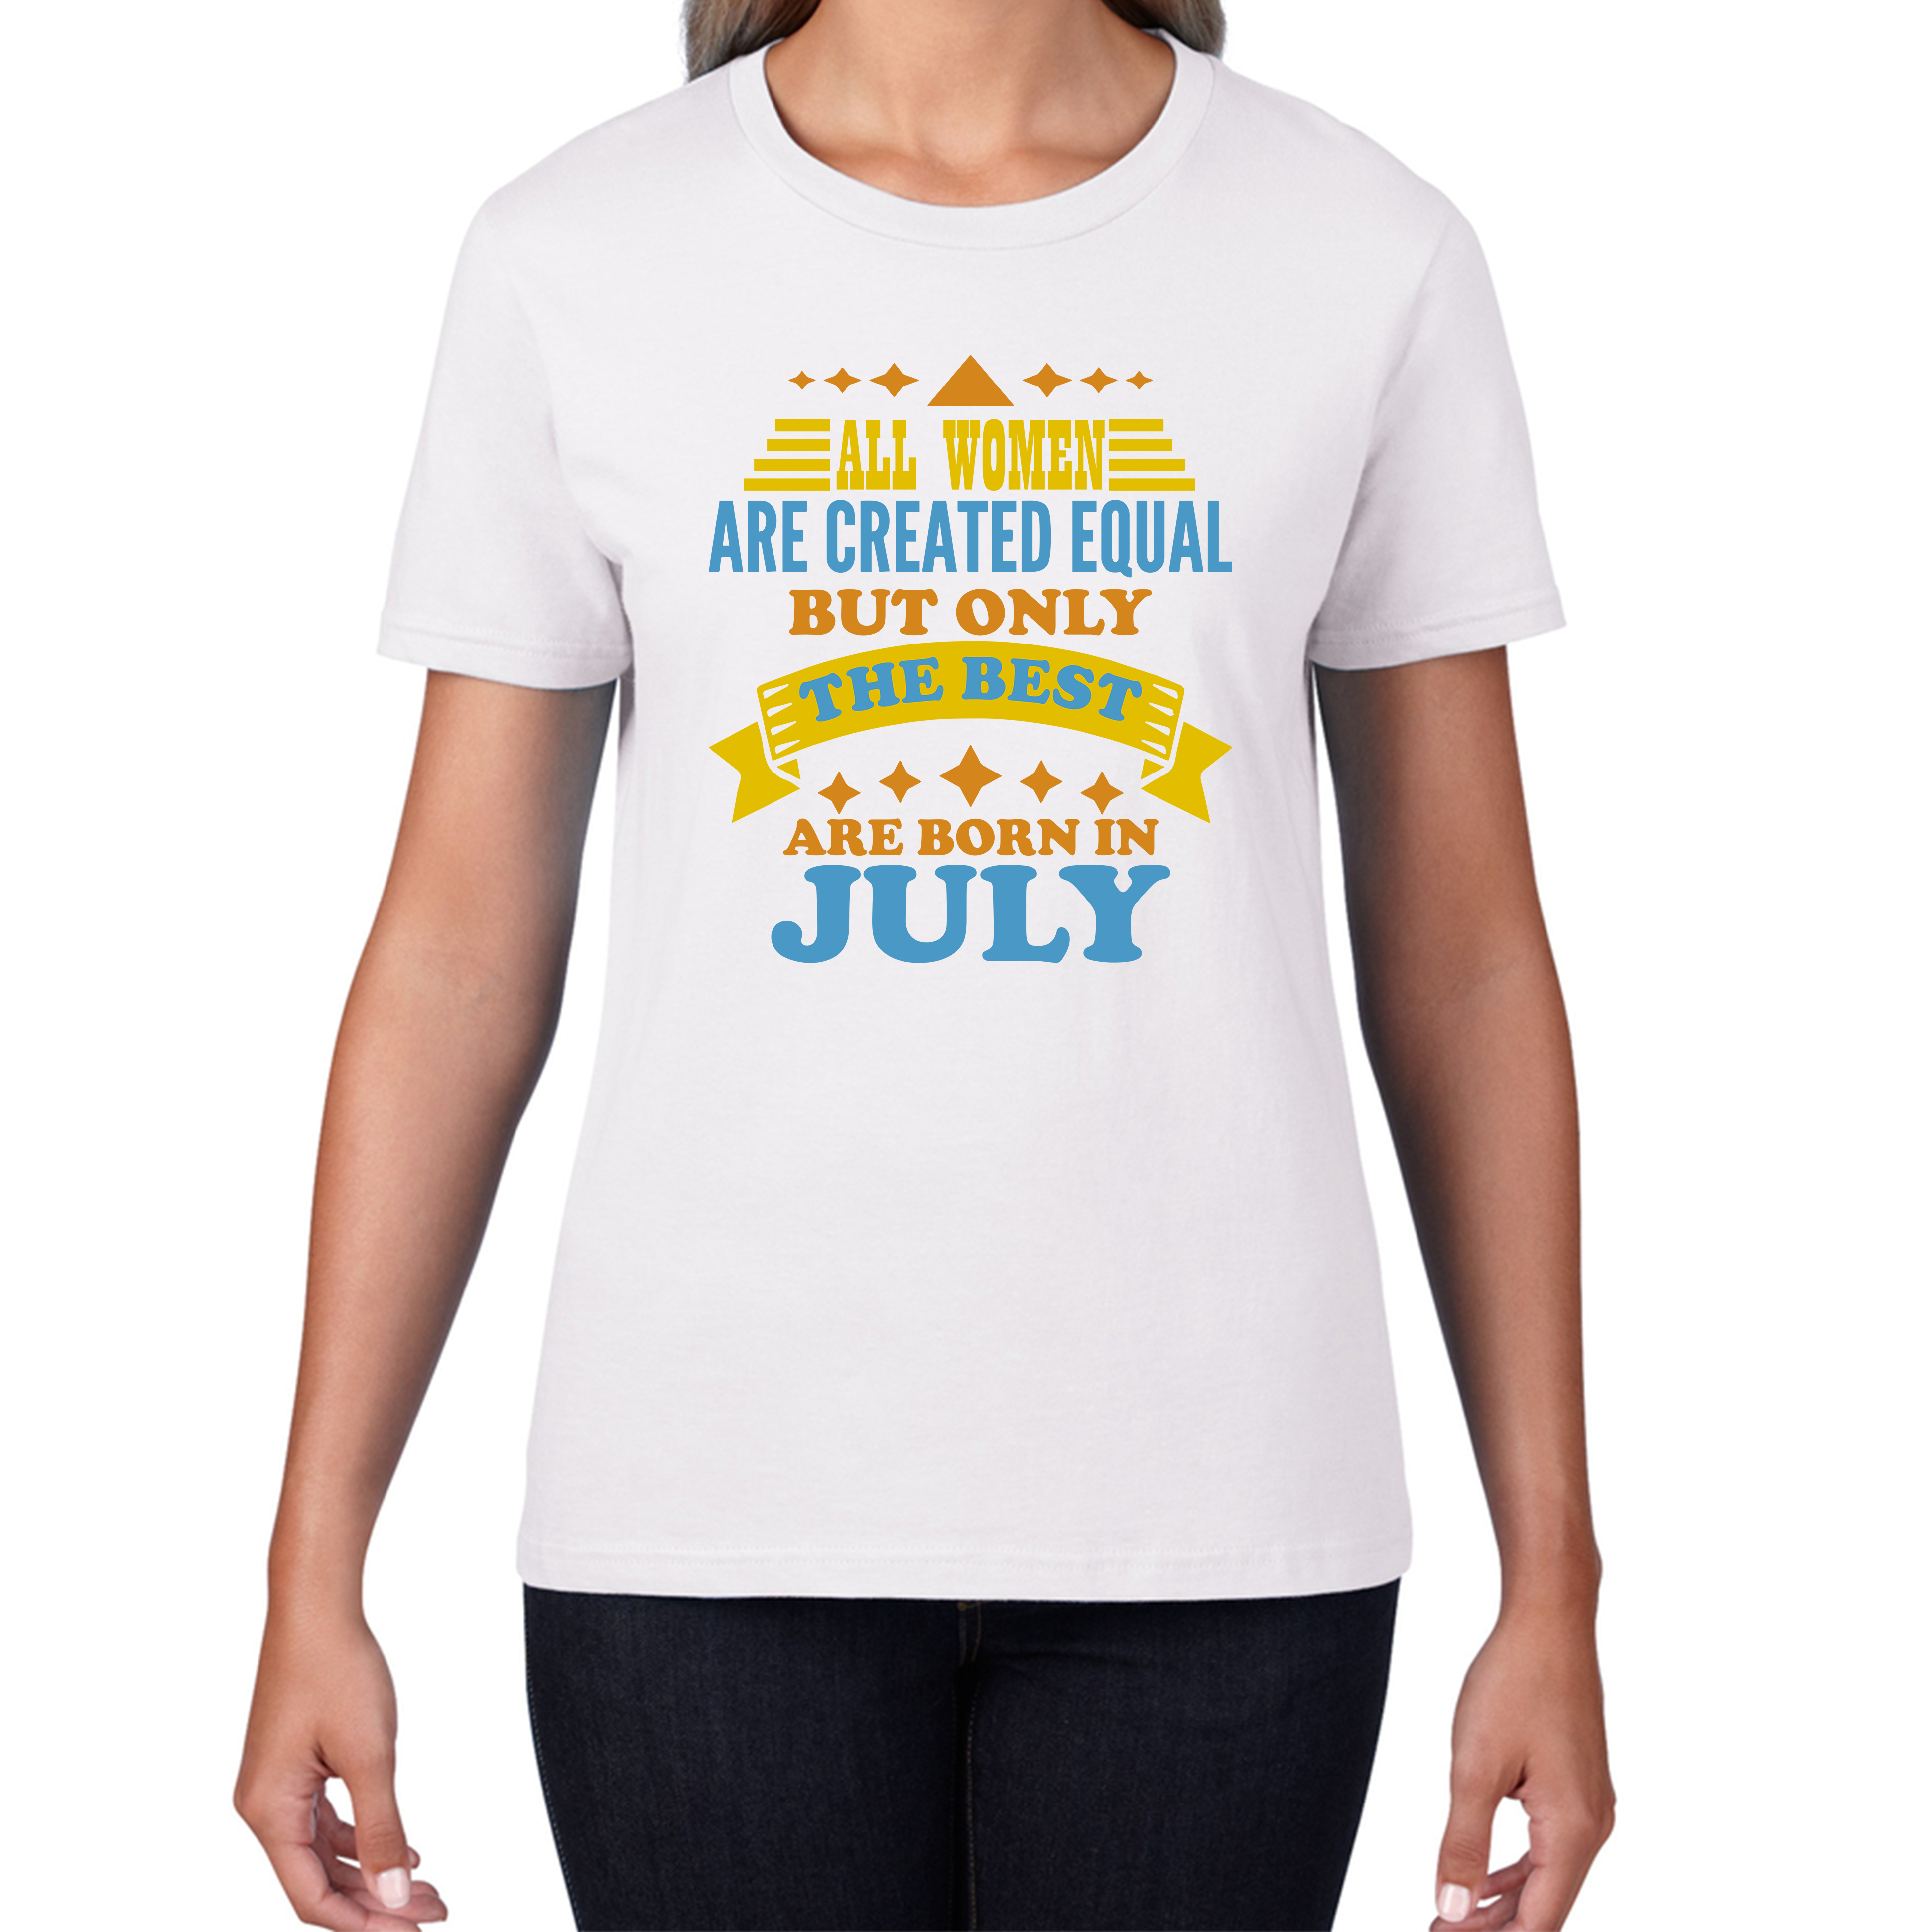 All Women Are Created Equal But Only The Best Are Born In July Funny Birthday Quote Womens Tee Top